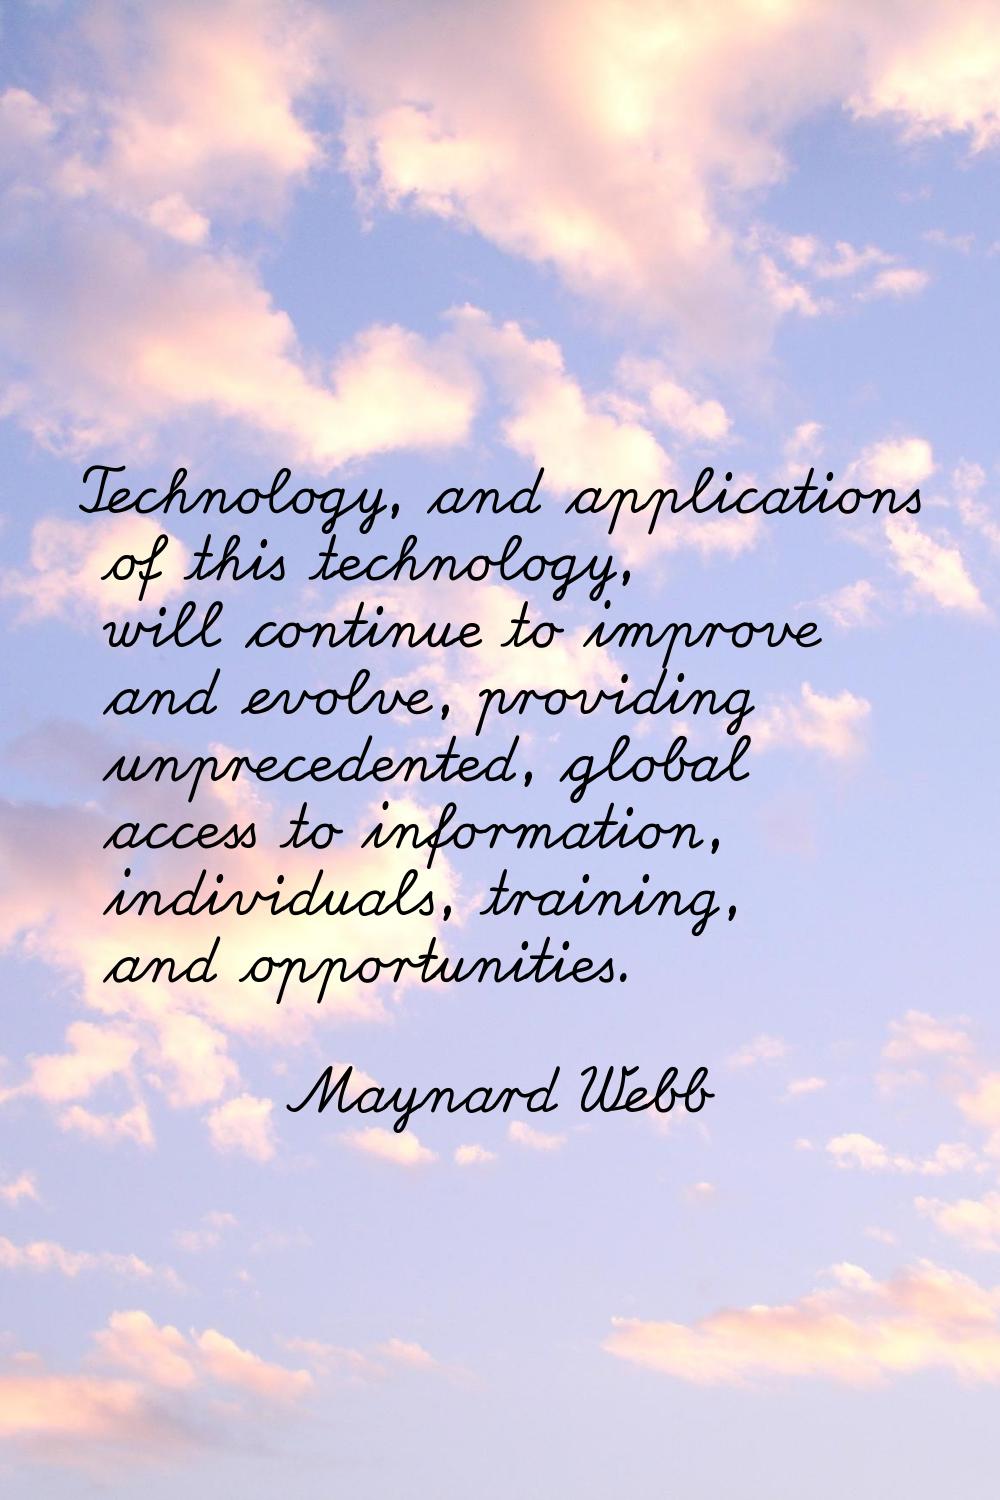 Technology, and applications of this technology, will continue to improve and evolve, providing unp